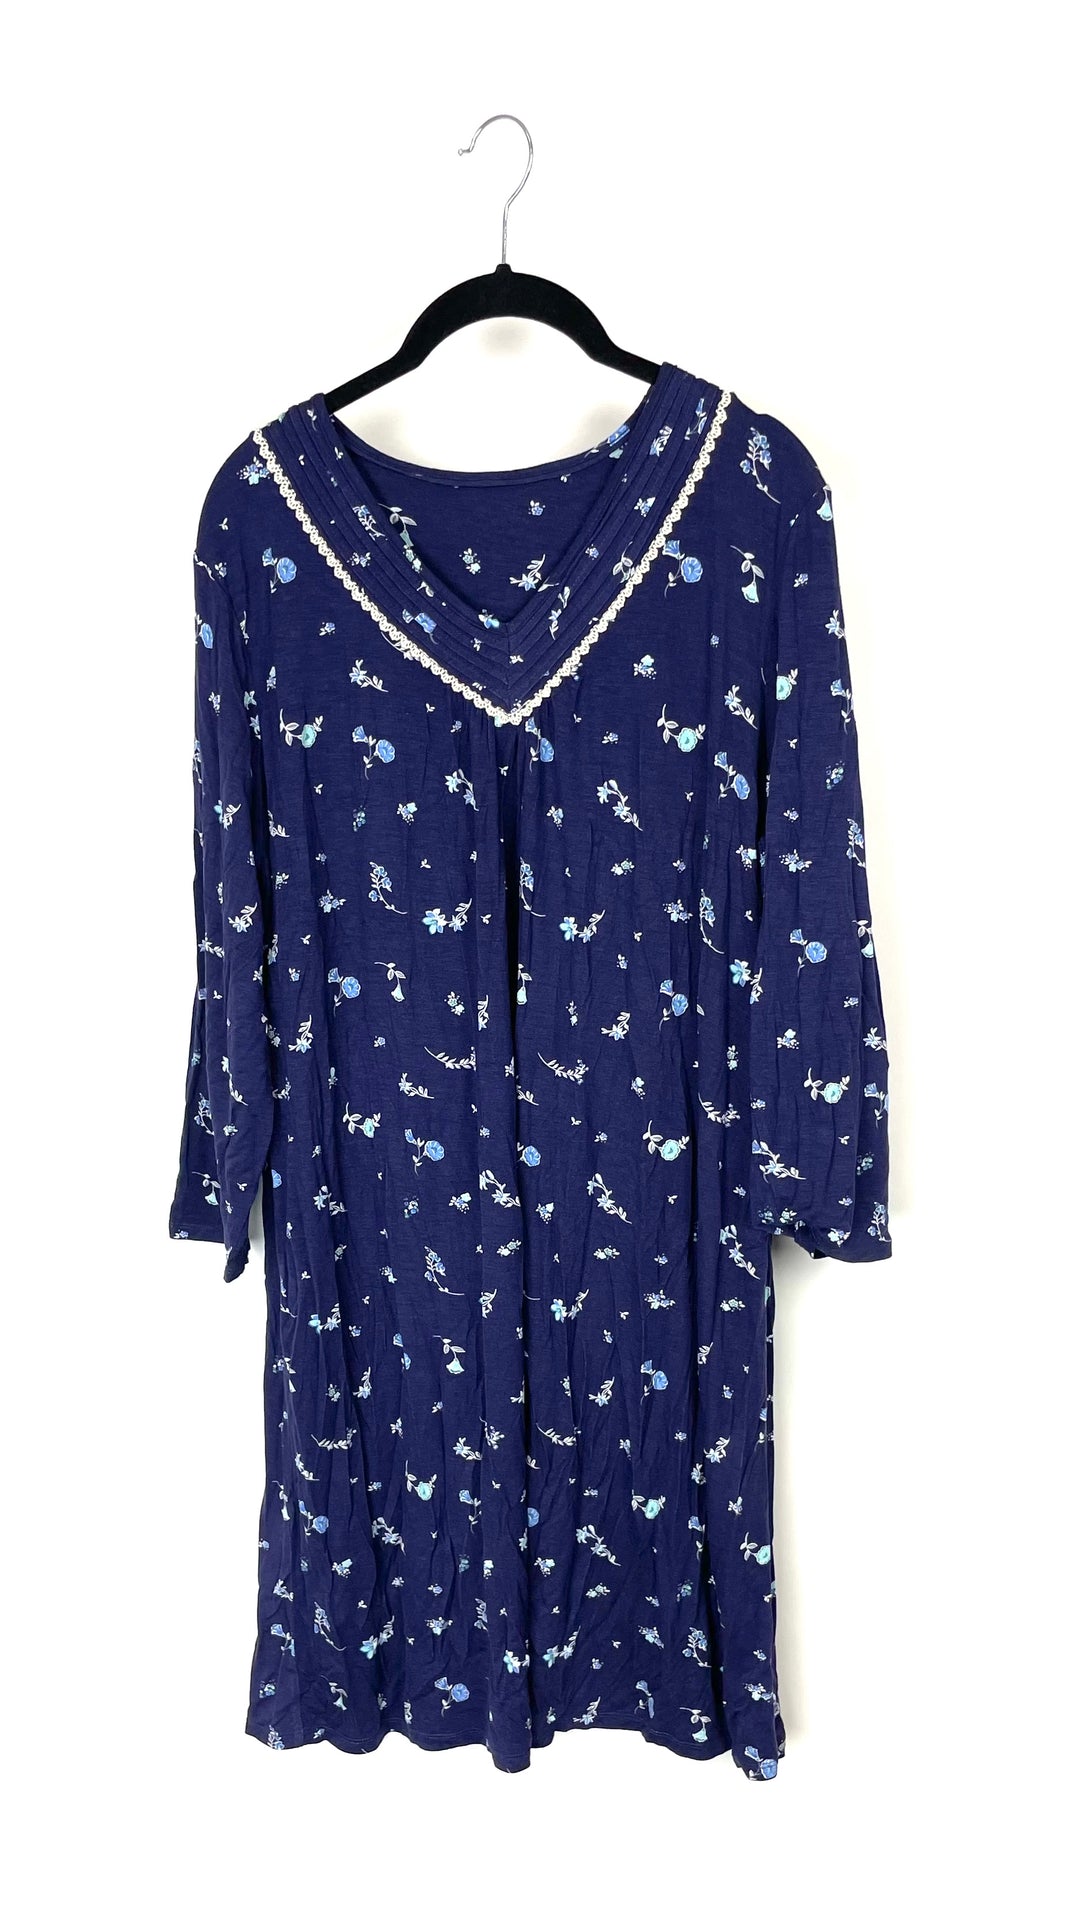 Navy Blue With Floral Design Long-Sleeve Nightgown - Medium